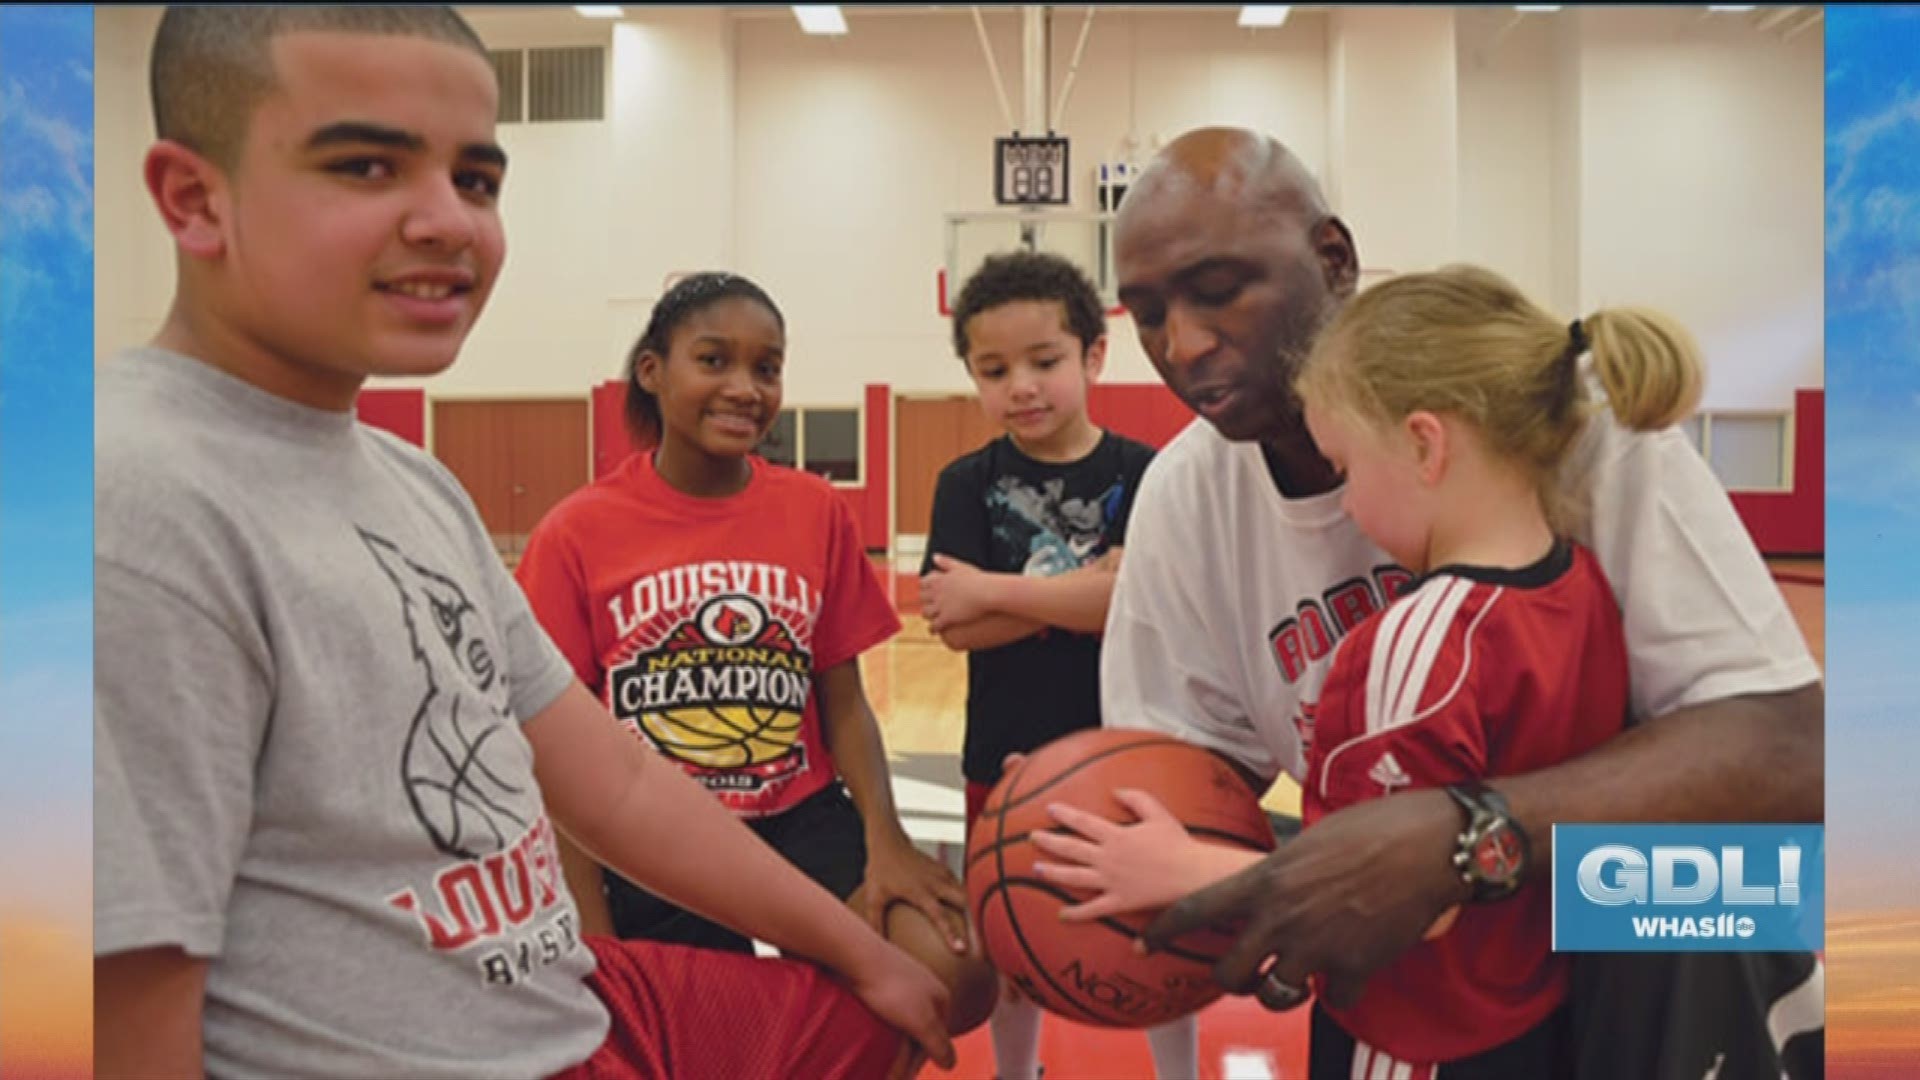 Former University of Louisville basketball player Robbie Valentine is holding a summer basketball camp for kids at the KFC Yum Center. The first session is June 24 - 28, 2019 and the second session is July 22 - 26.